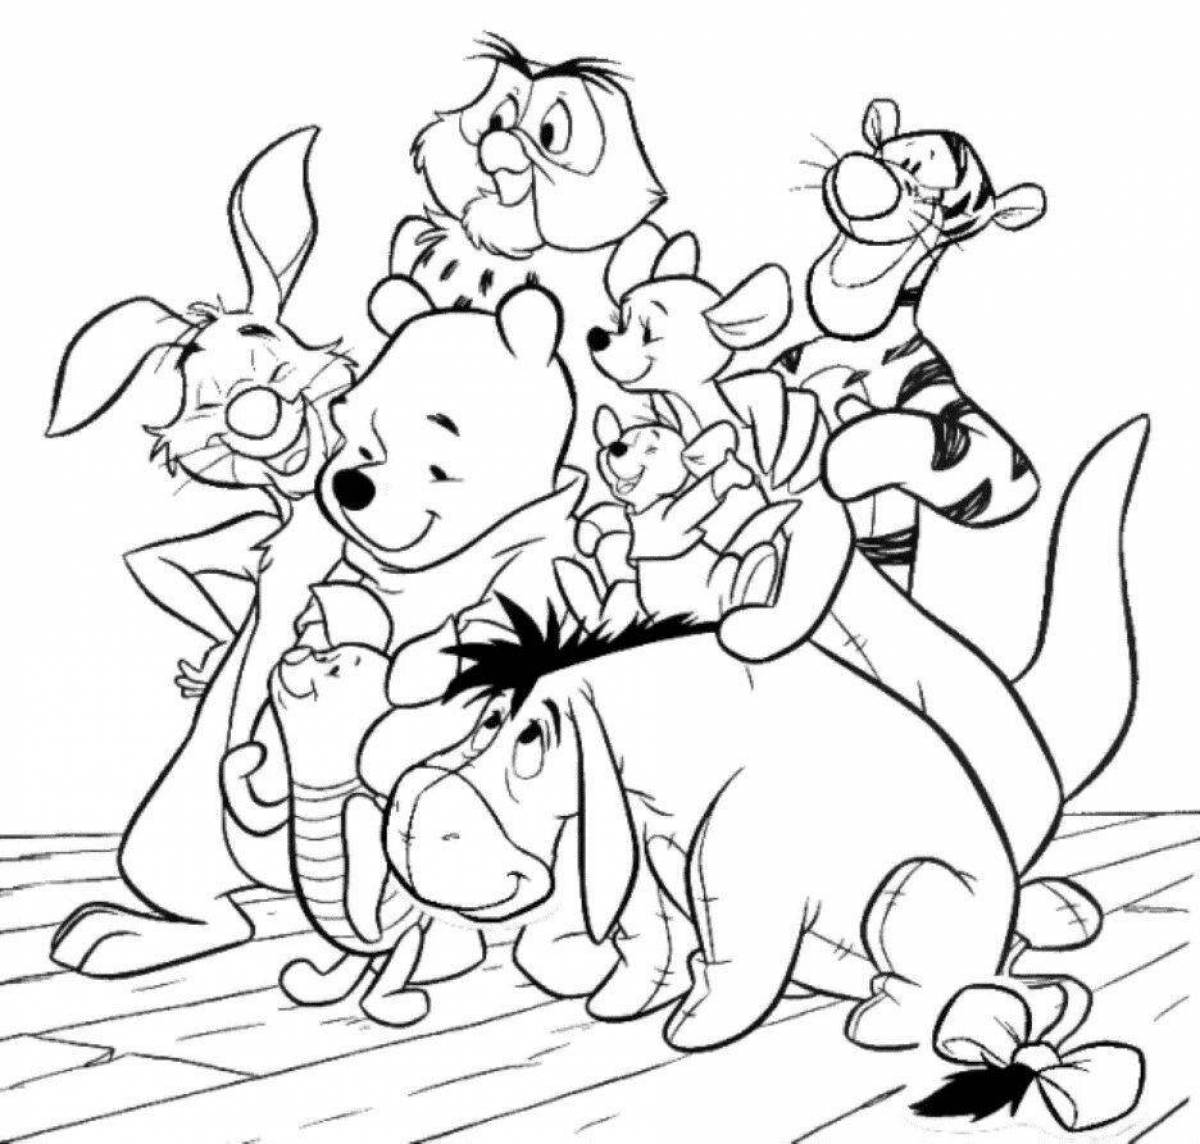 Winnie the pooh and his friends #3